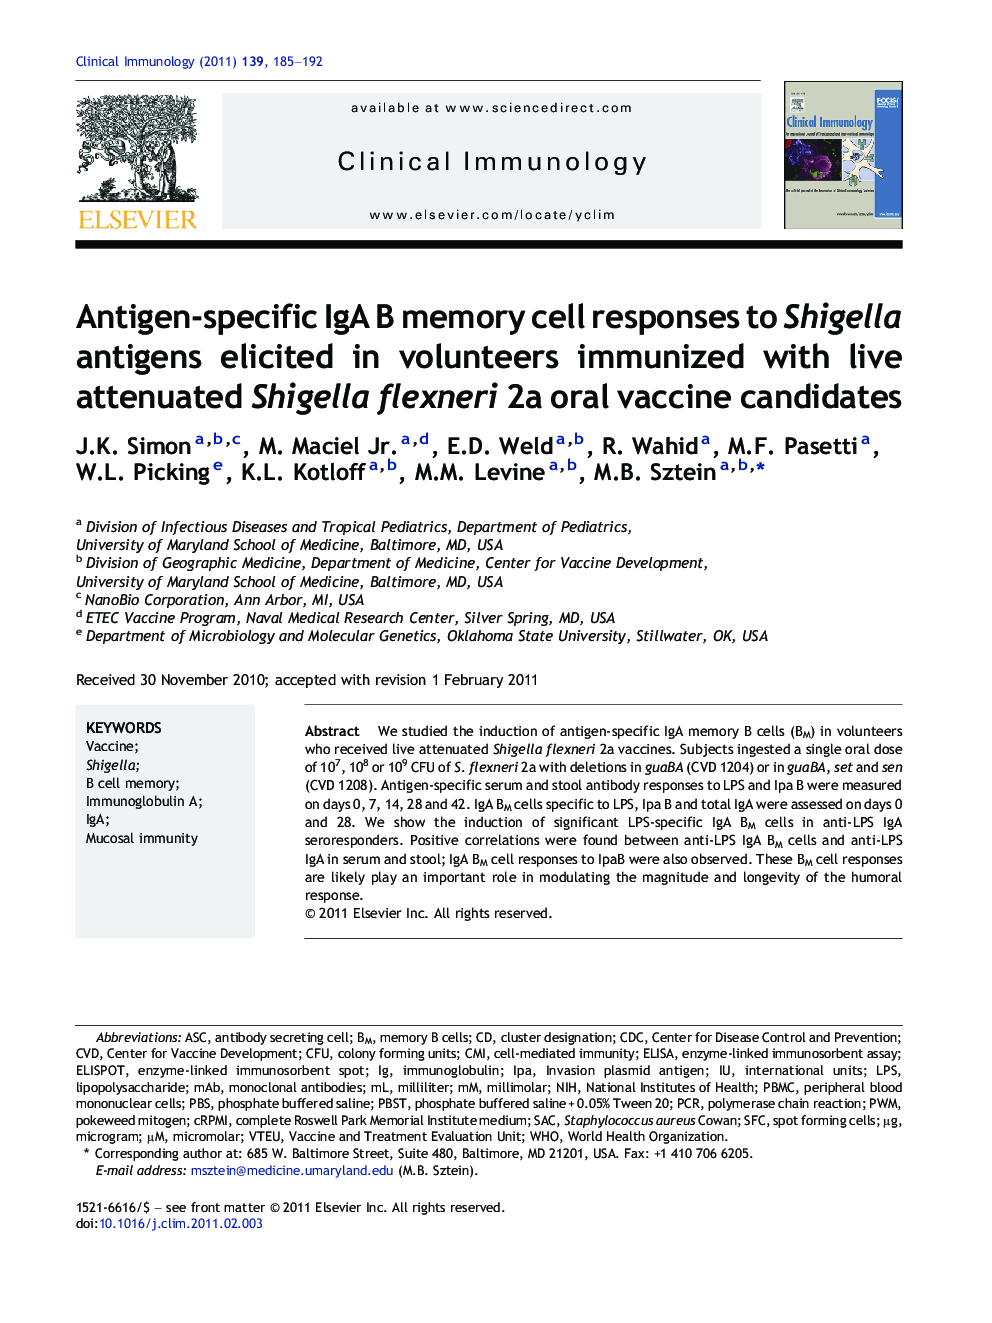 Antigen-specific IgA B memory cell responses to Shigella antigens elicited in volunteers immunized with live attenuated Shigella flexneri 2a oral vaccine candidates